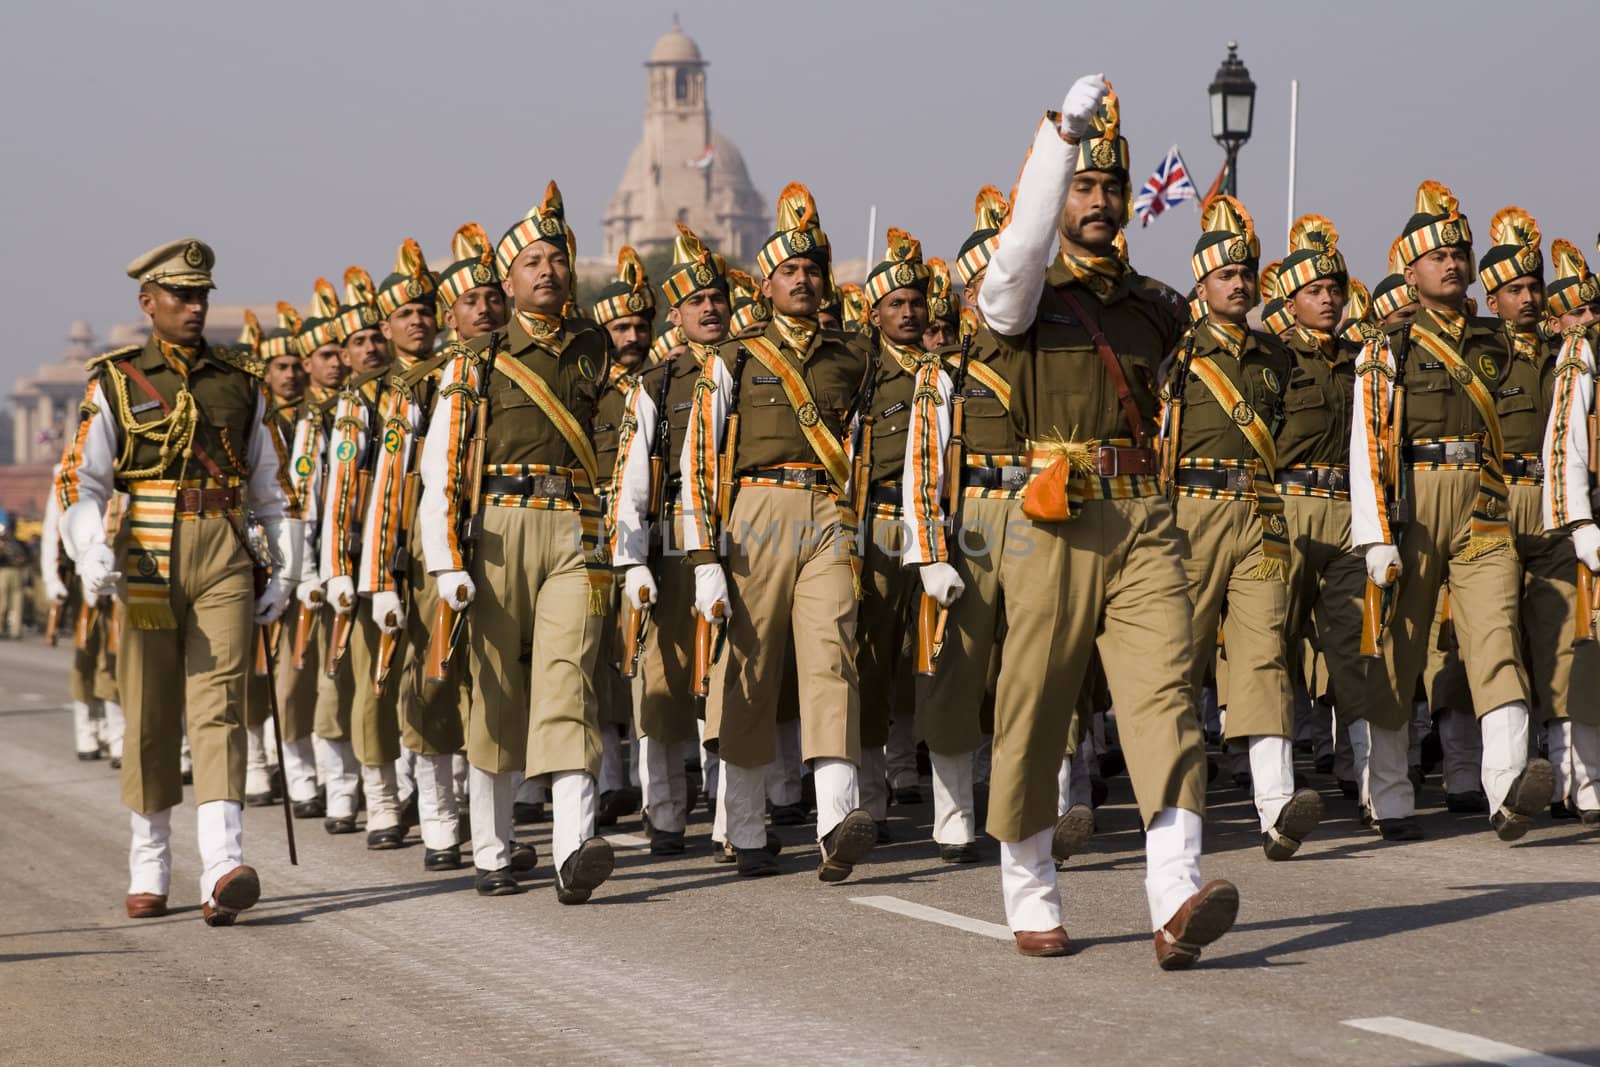 Soldiers parading down the Raj Path in preparation for the Republic Day Parade, New Delhi, India